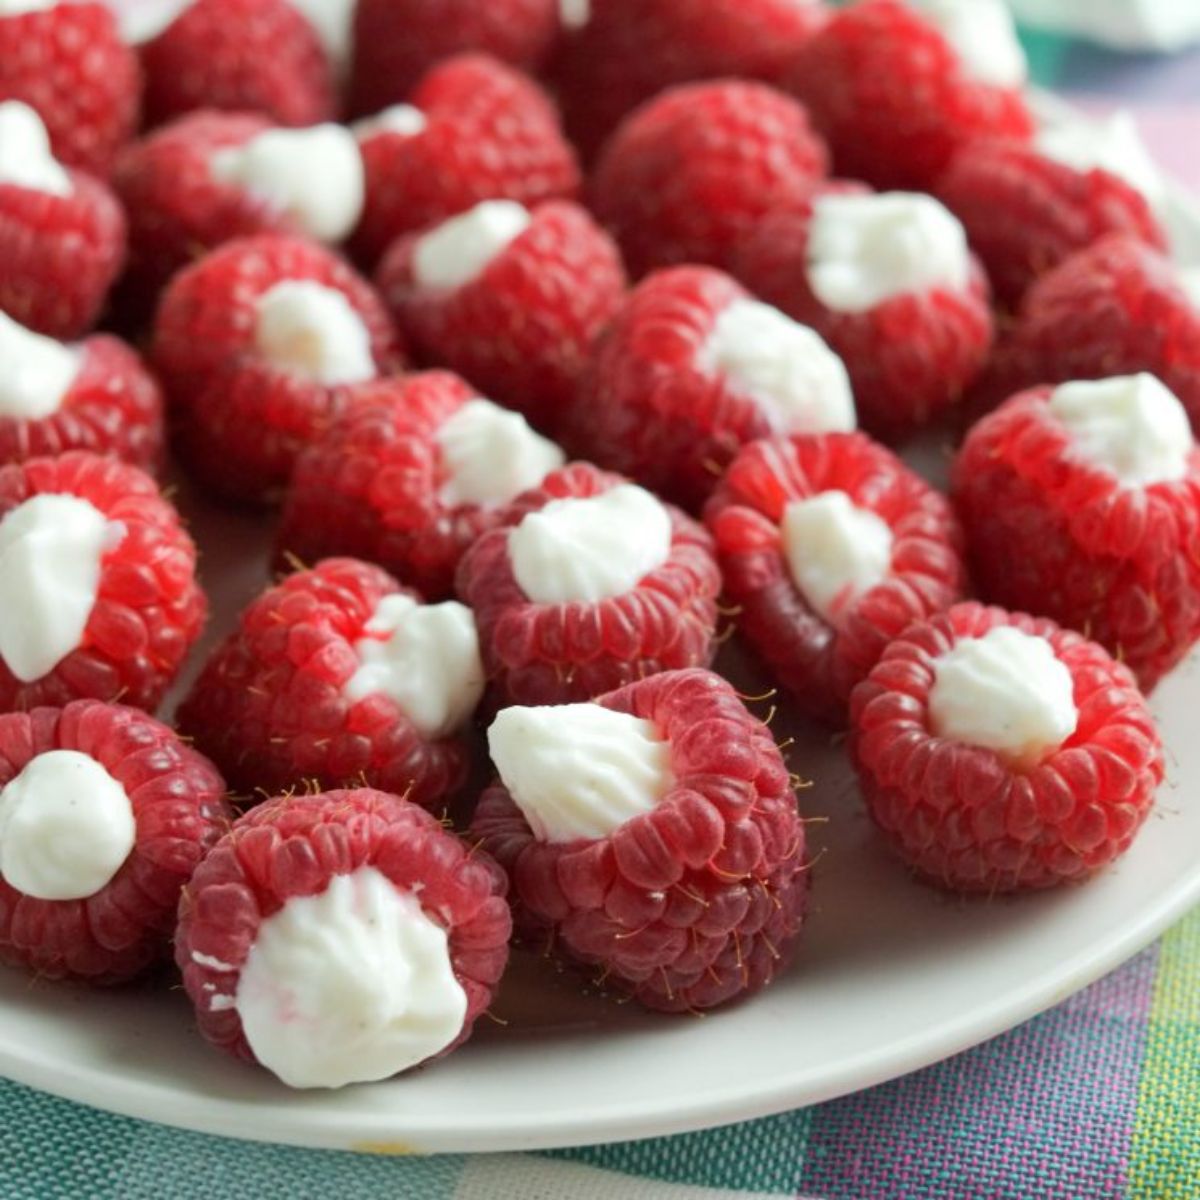 a plate of raspberries filled with yoghurt